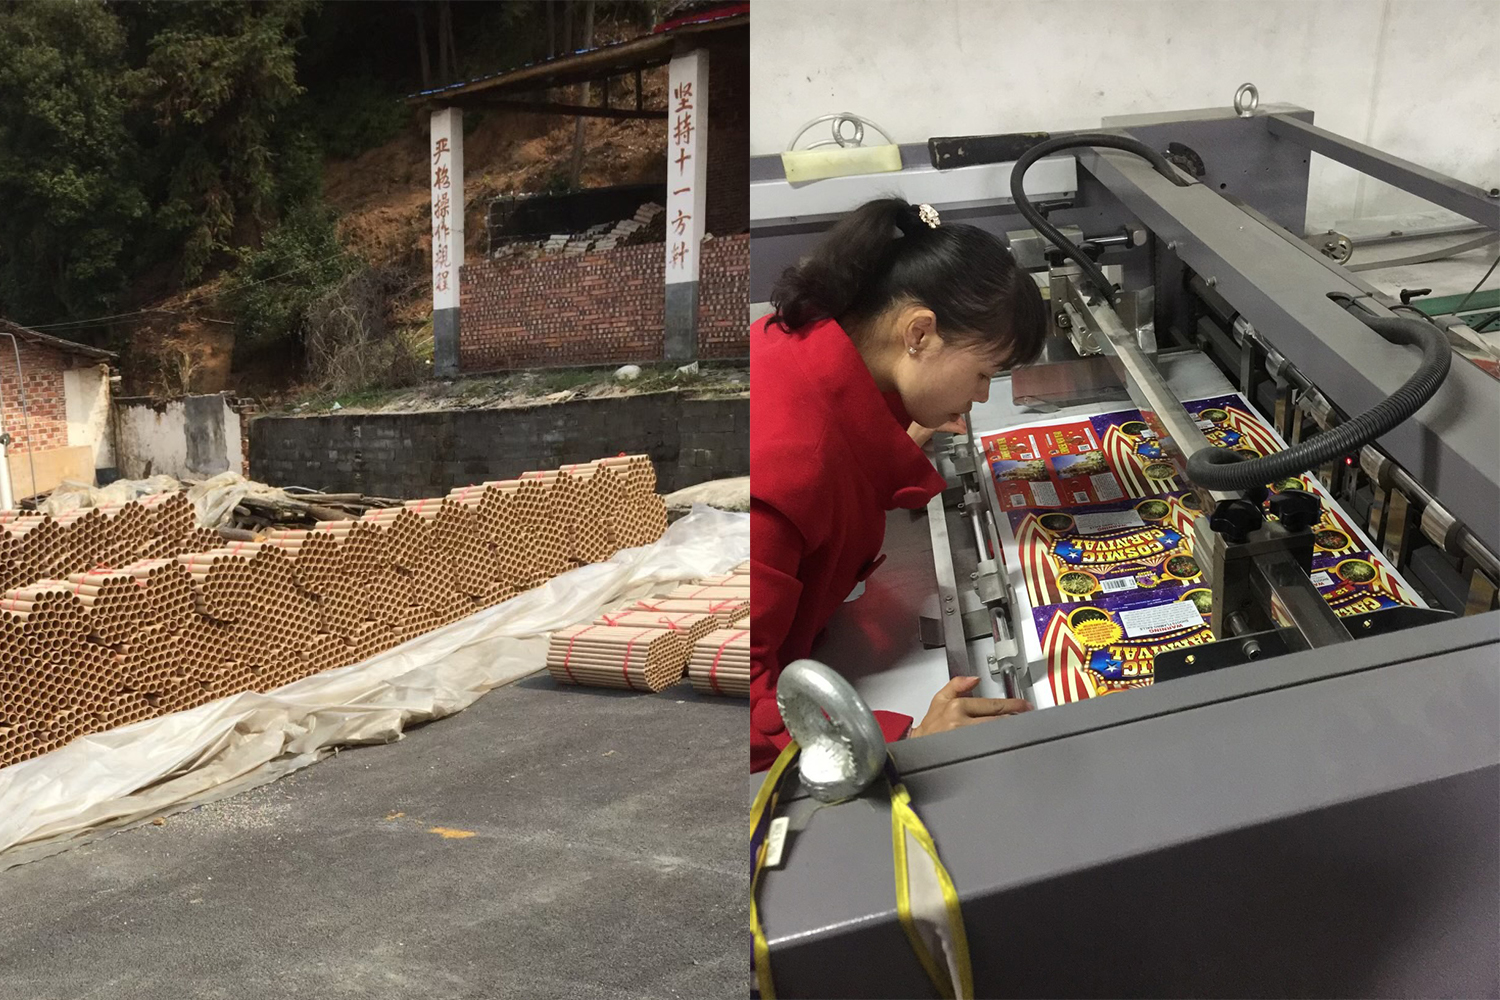 On the left, a photo of the cardboard tubes used for fireworks in China. On the right, a Chinese worker looks at the artwork for a firework.